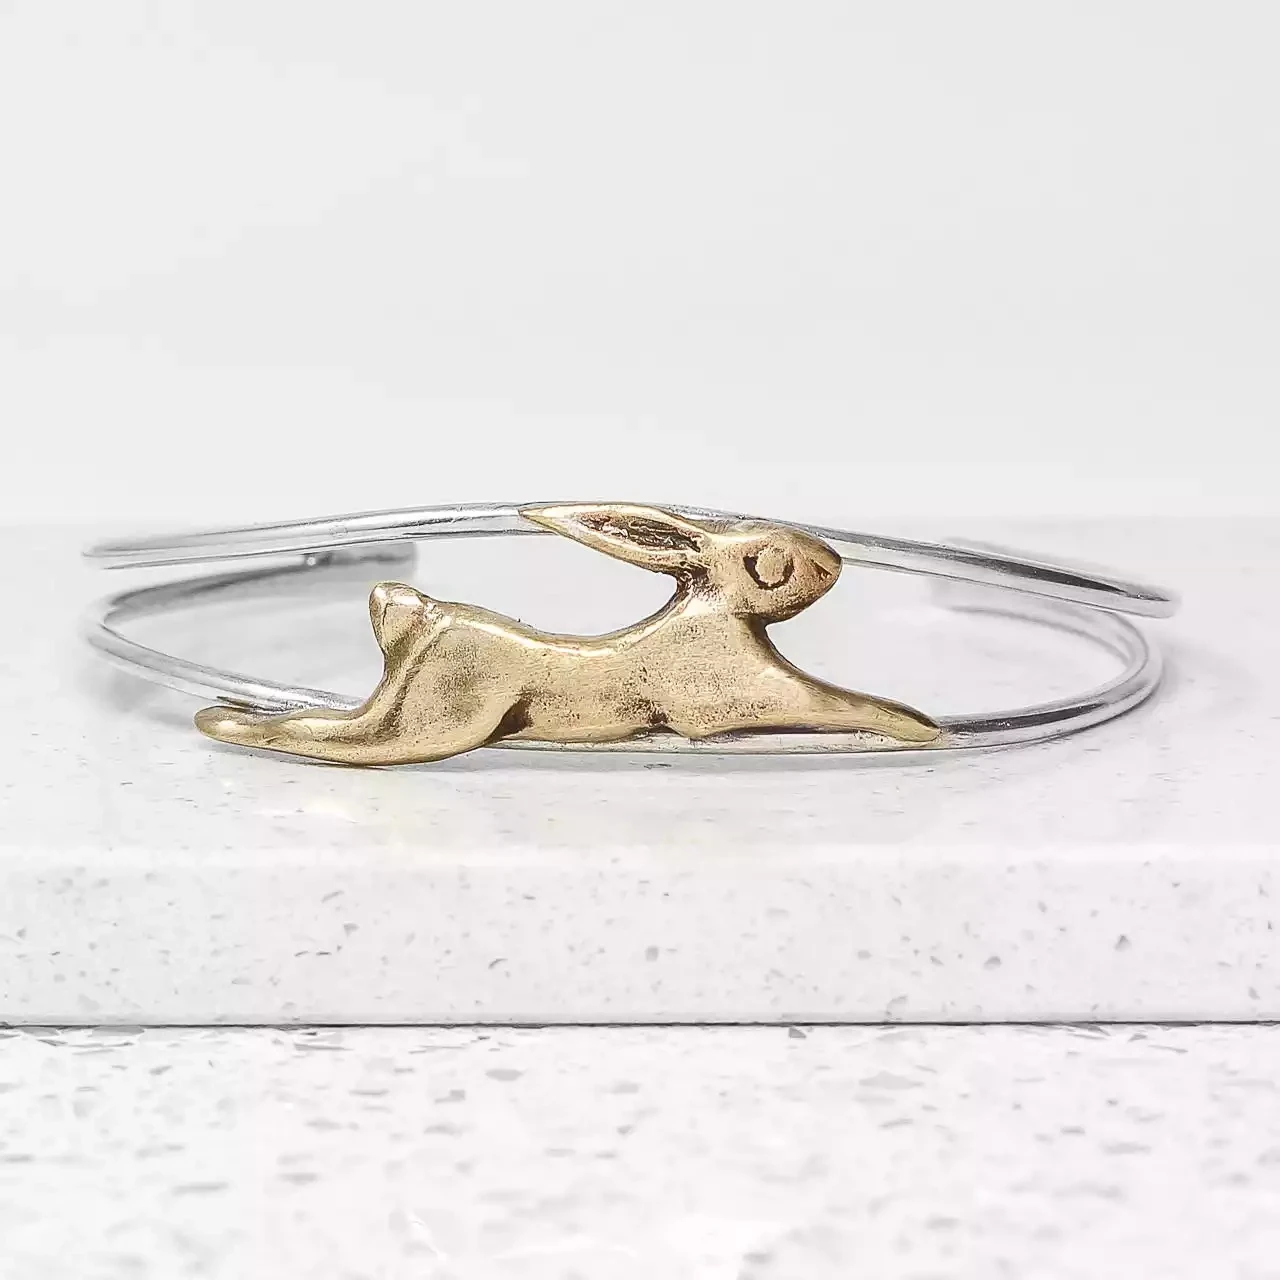 Hare Bronze and Silver Open Oval Bangle by Xuella Arnold